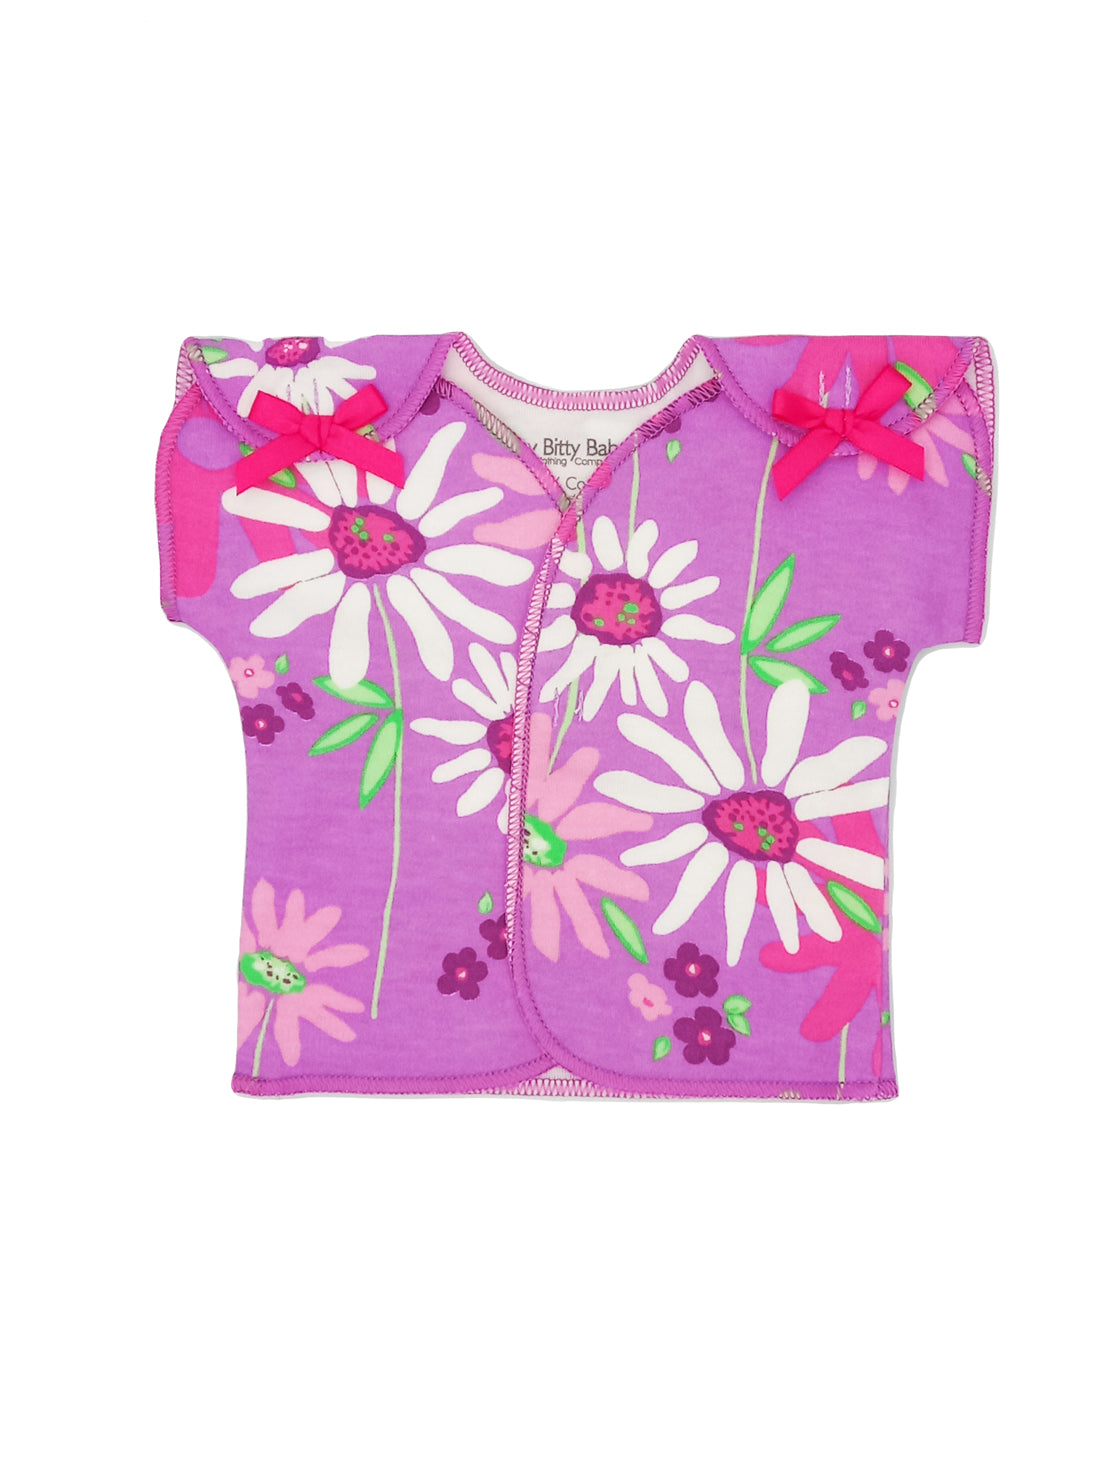 NICU Baby Top, Bright Floral - Incubator Vest - Itty Bitty Baby Clothing